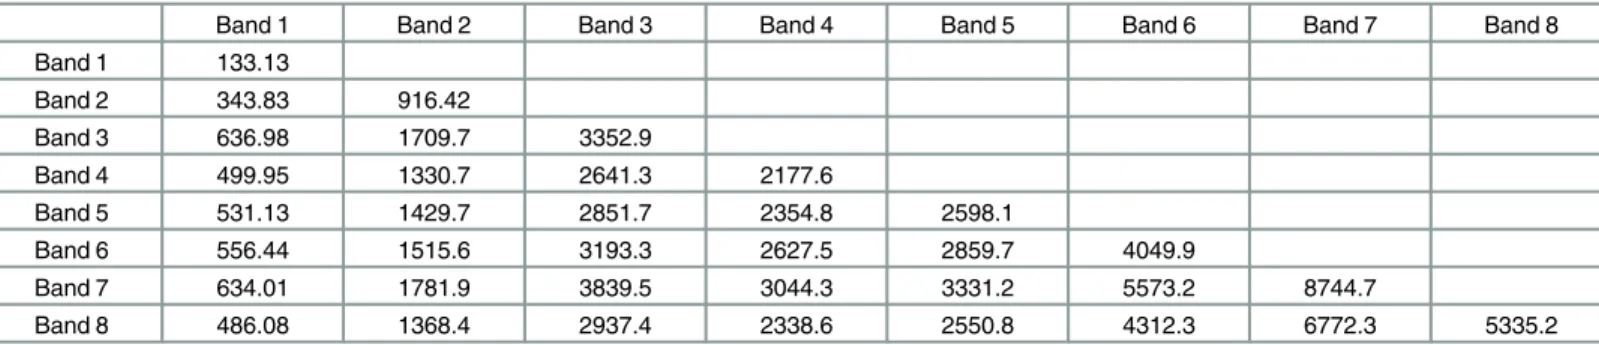 Table 4 shows that the OIF values of bands 3, 5, and 7 are the largest. This result indicates that the combination of bands 3, 5, and 7 that correspond to the largest OIF values have the largest amount of information, and the correlations between bands are